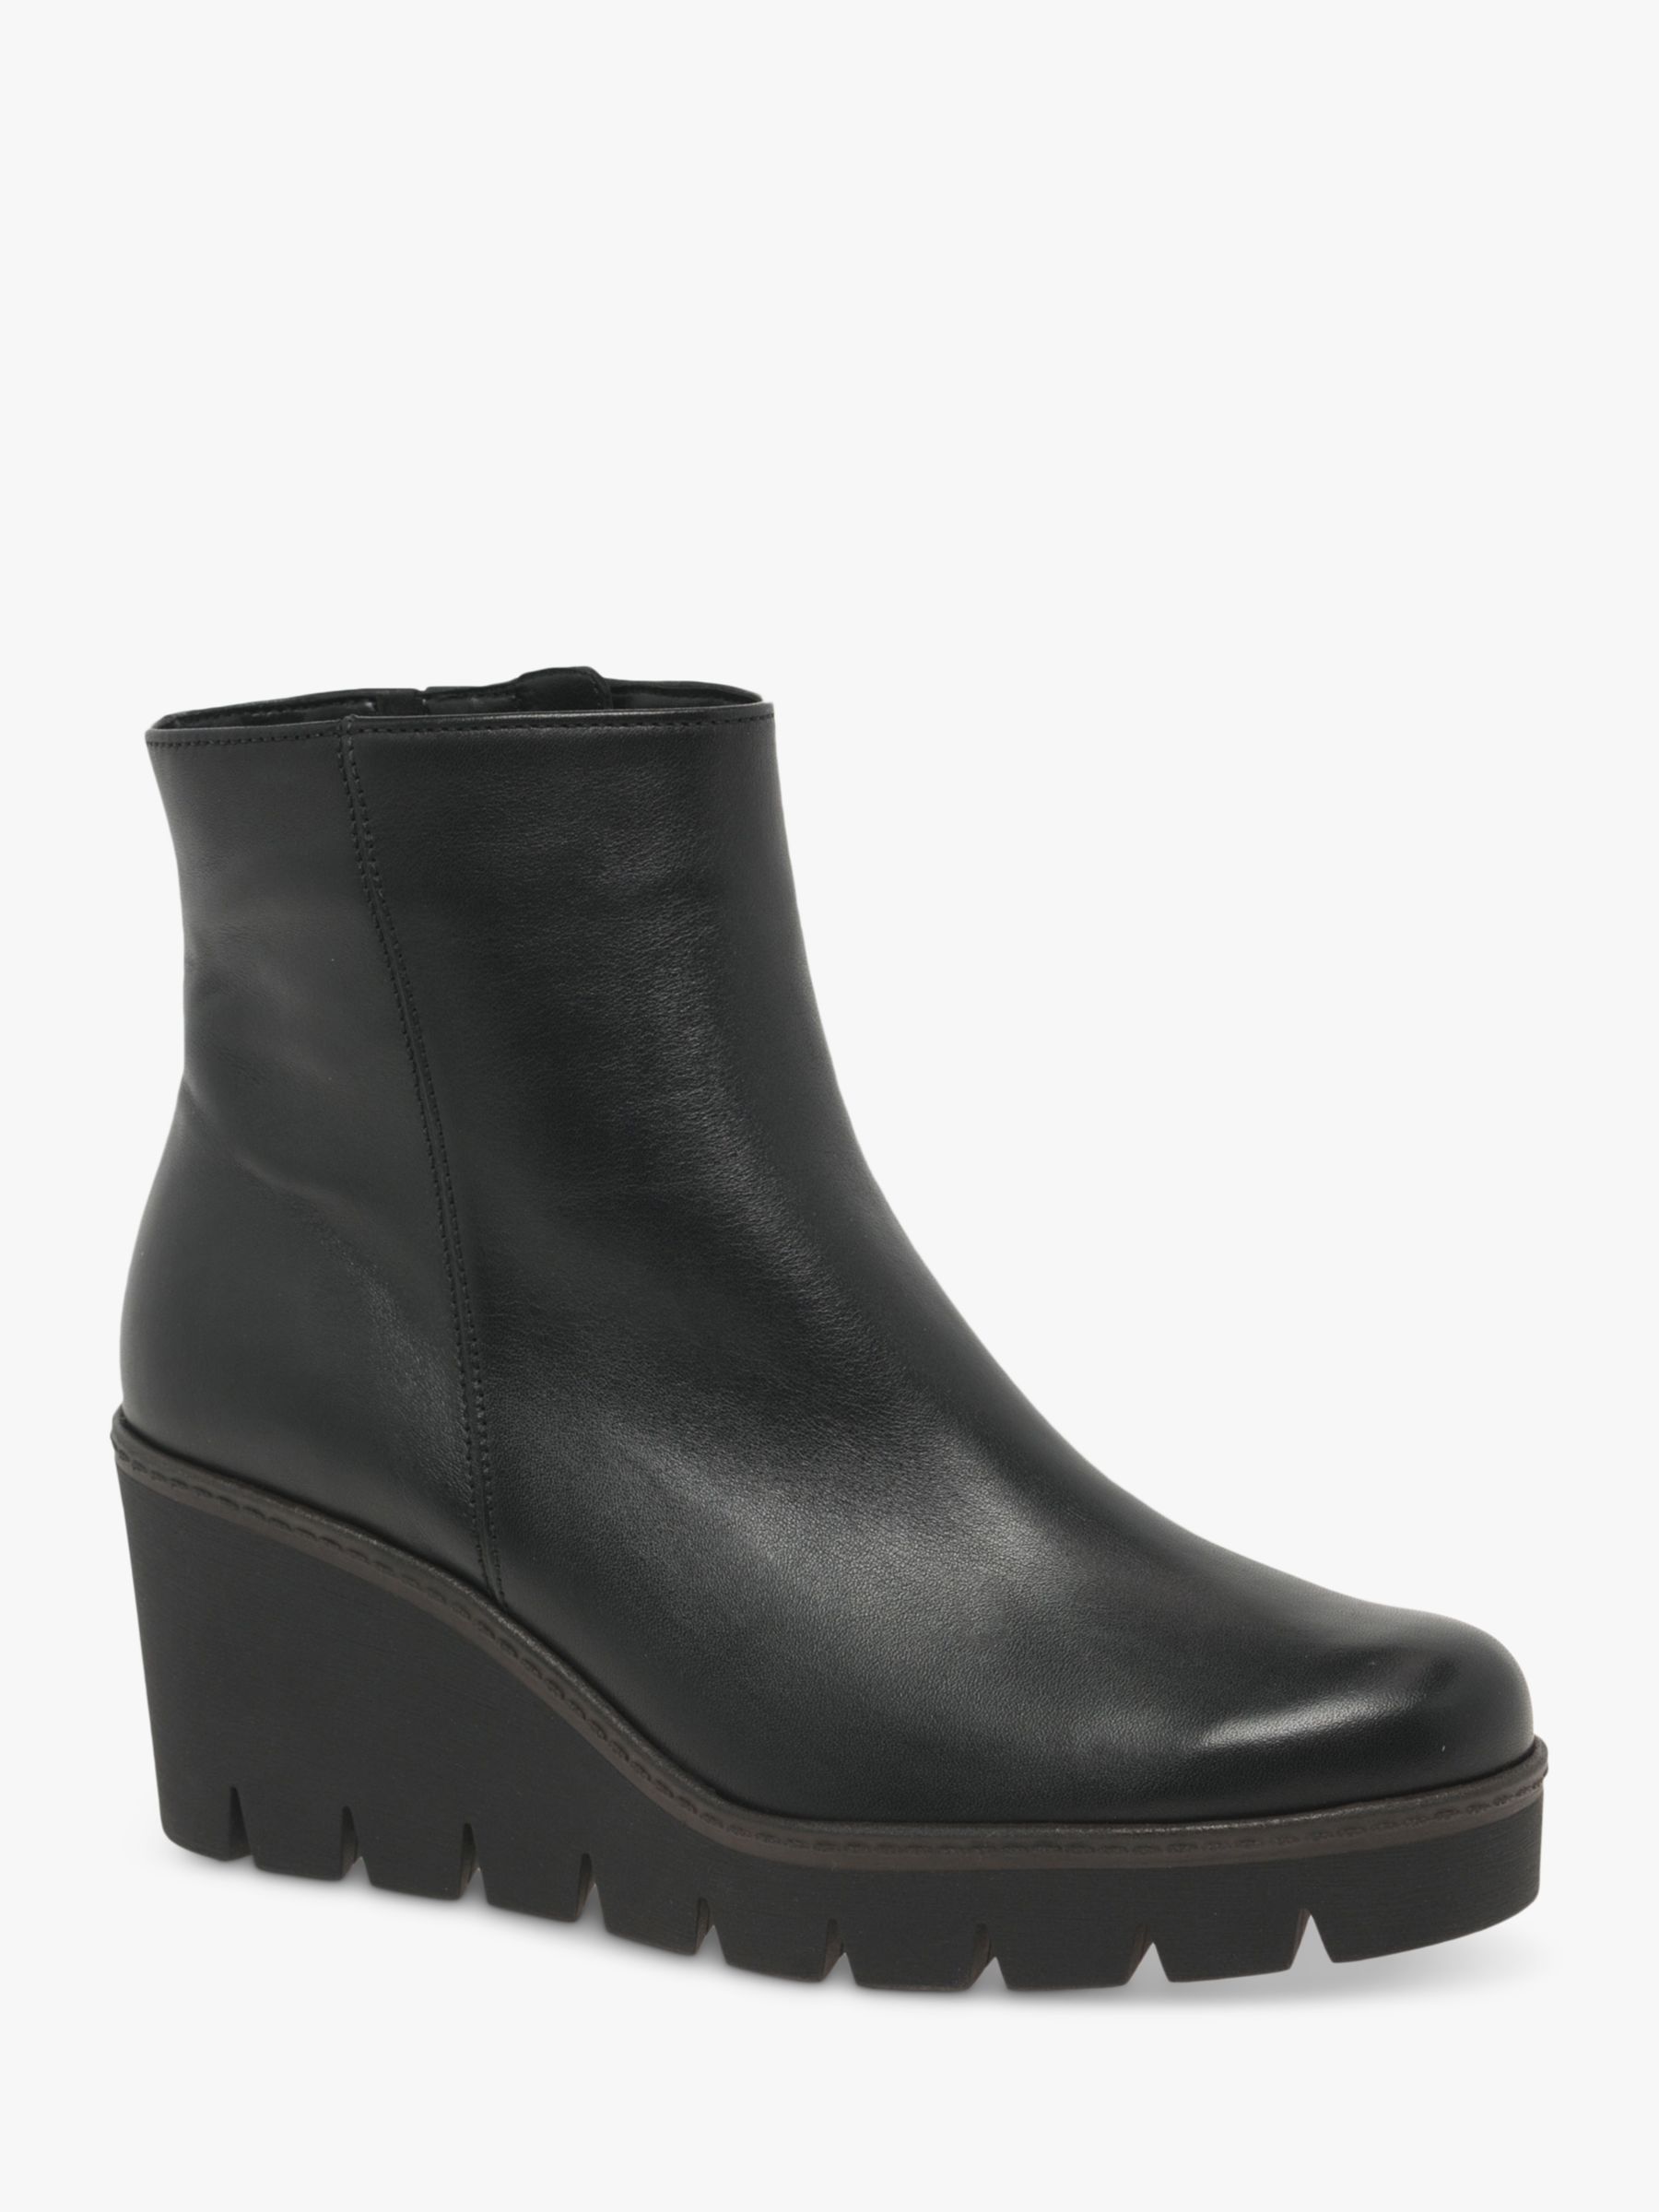 Utopia Leather Wedge Boots, Black at John Lewis & Partners